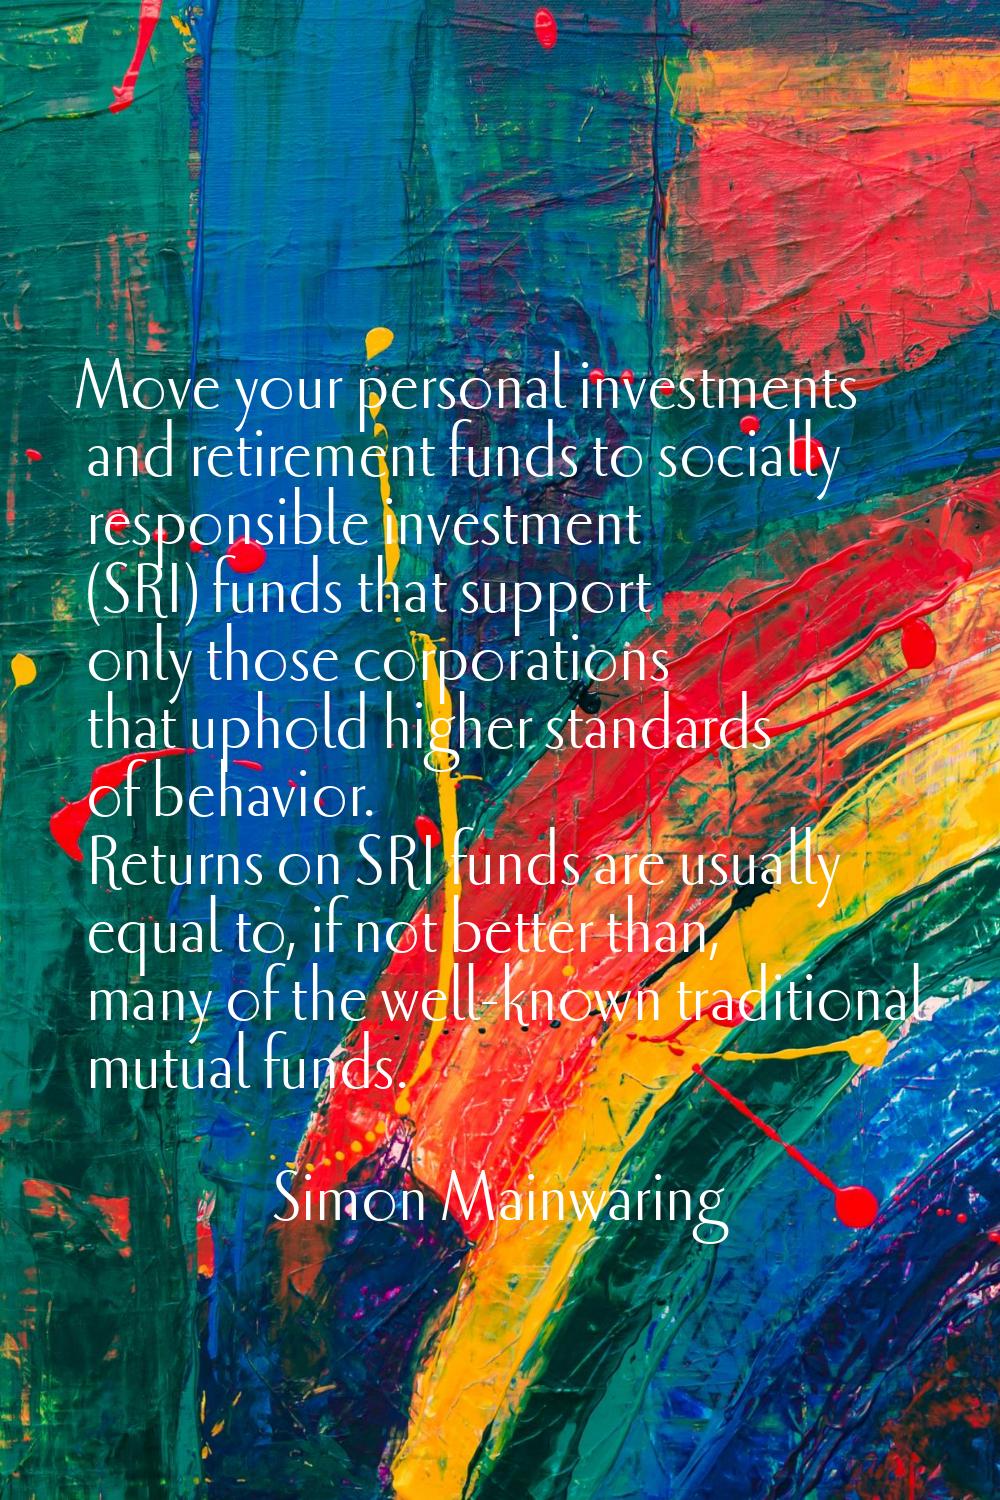 Move your personal investments and retirement funds to socially responsible investment (SRI) funds 